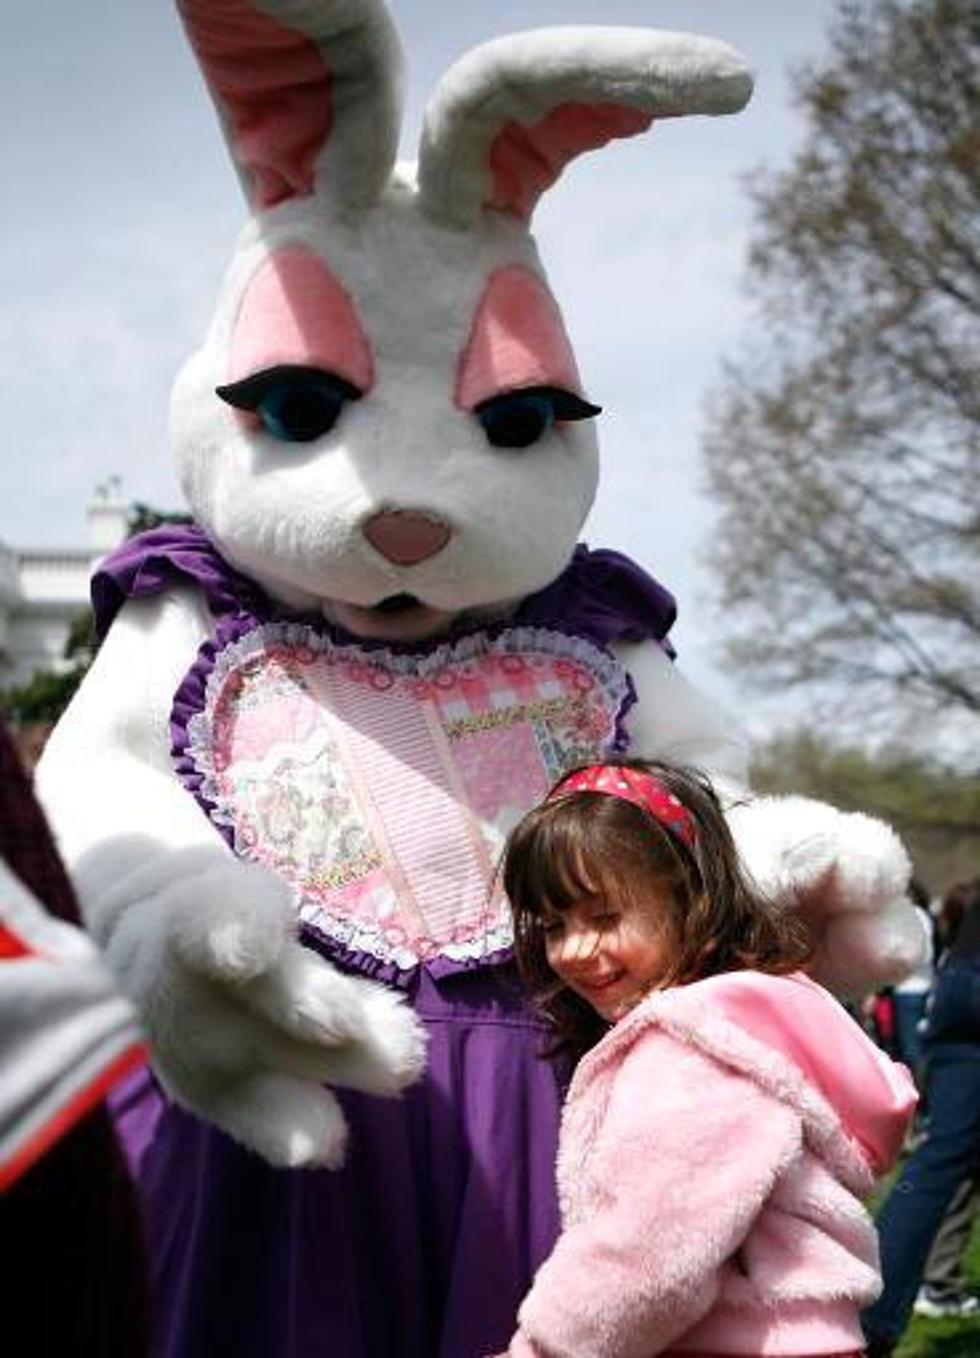 Meet and Get Picture Taken With the Easter Bunny at Bass Pro Shops This Week